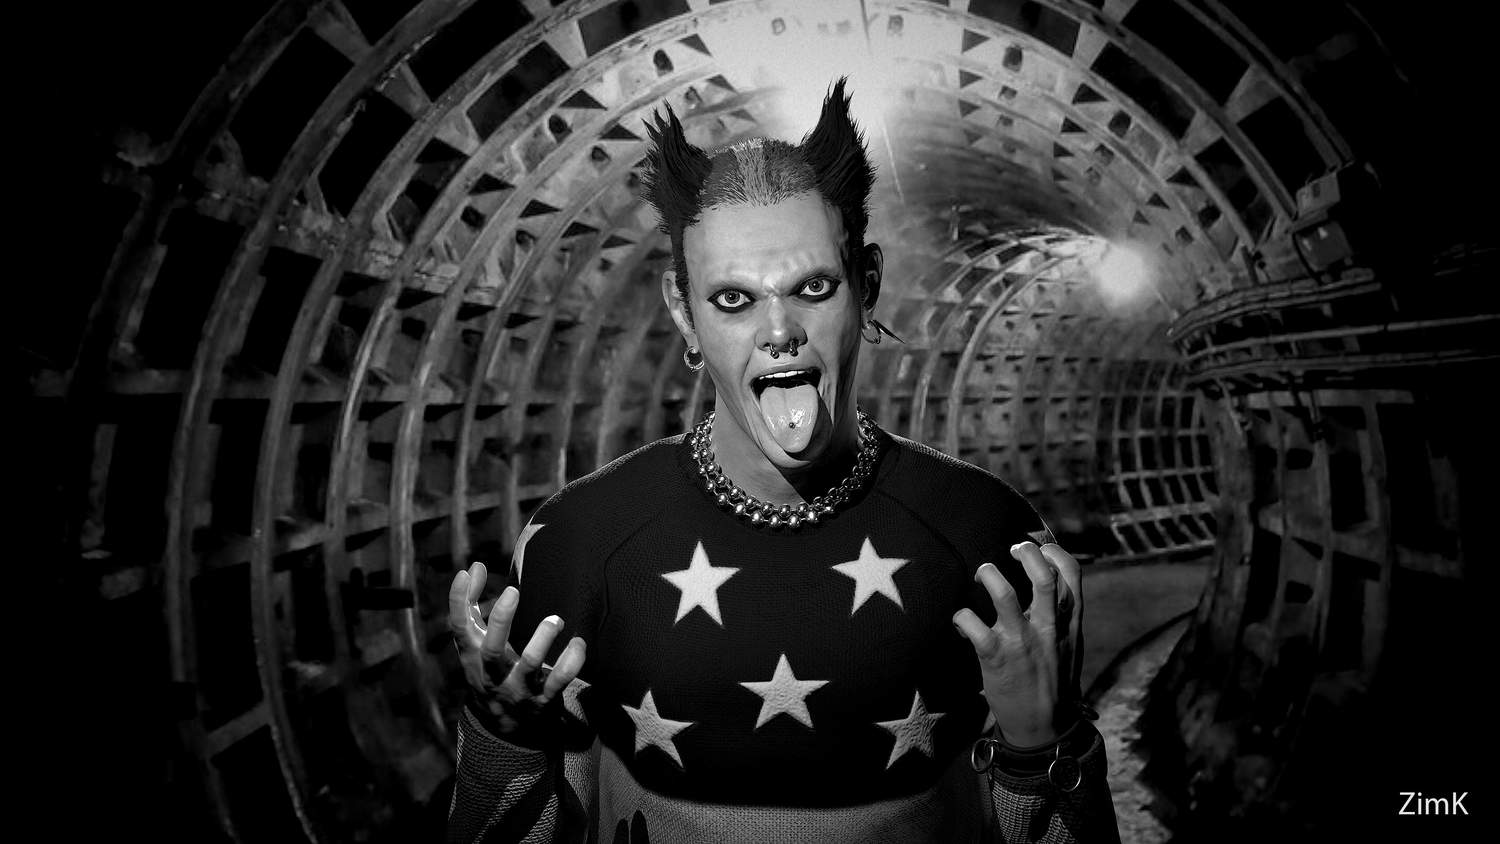 NEWS • Firestarter | Celebrating The Sound Of The Prodigy And The Impact Of  Keith Flint who past away 2 years ago. • March 2021 • Peek-A-Boo Magazine